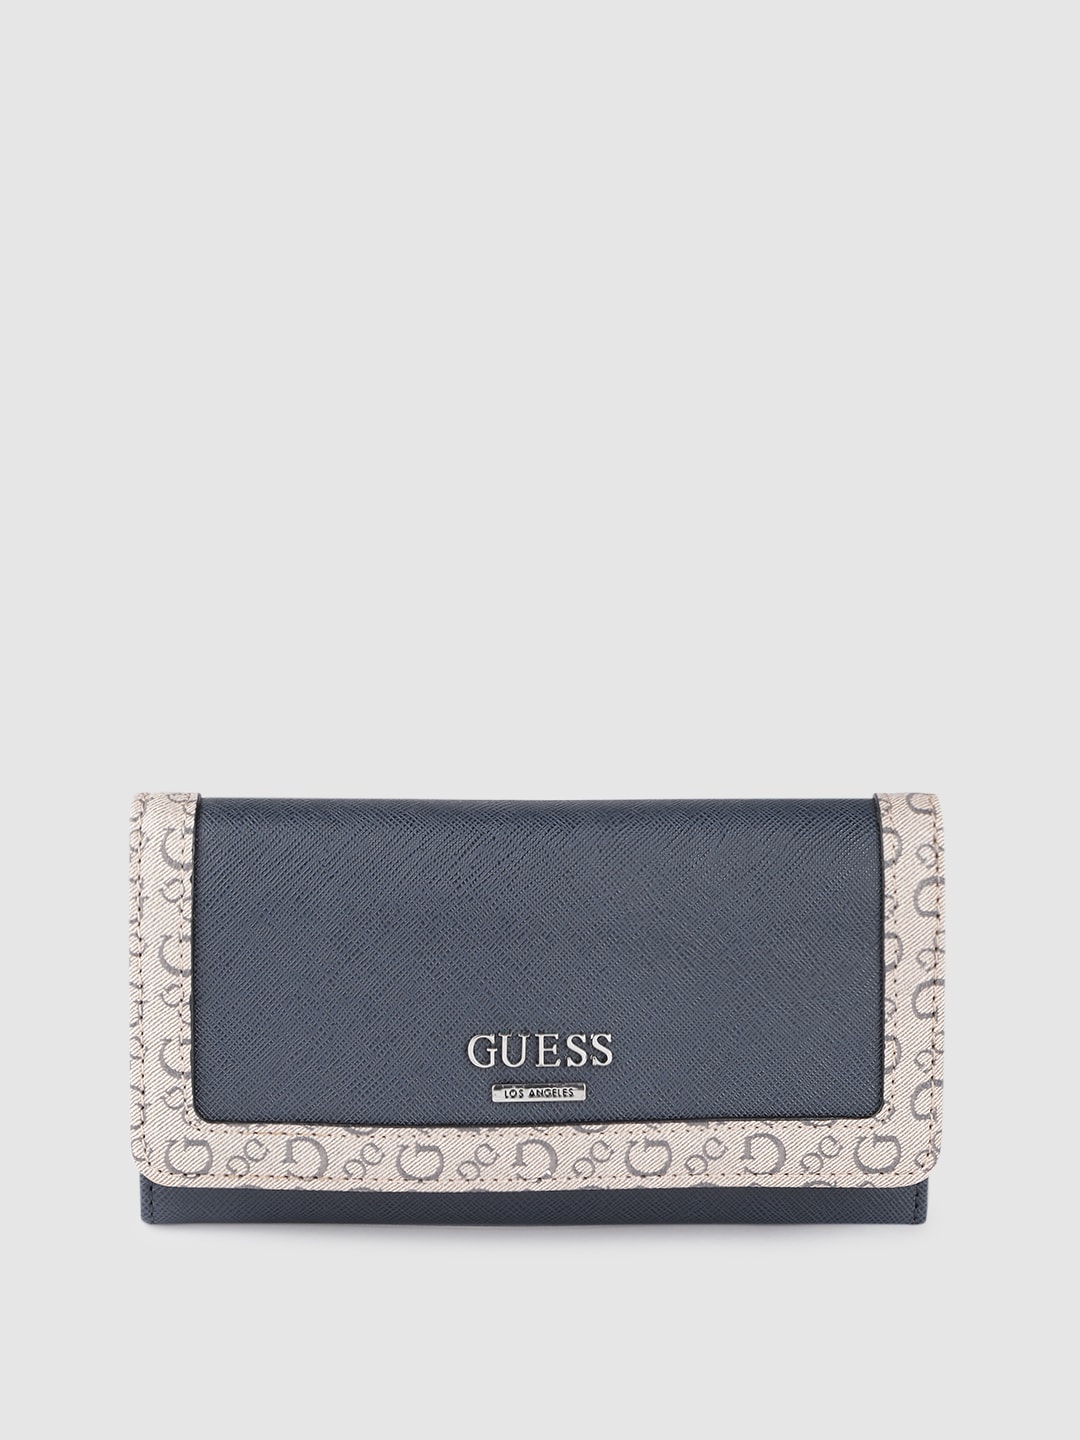 GUESS Women Navy Blue & Cream-Coloured Saffiano Textured Three Fold Wallet Price in India